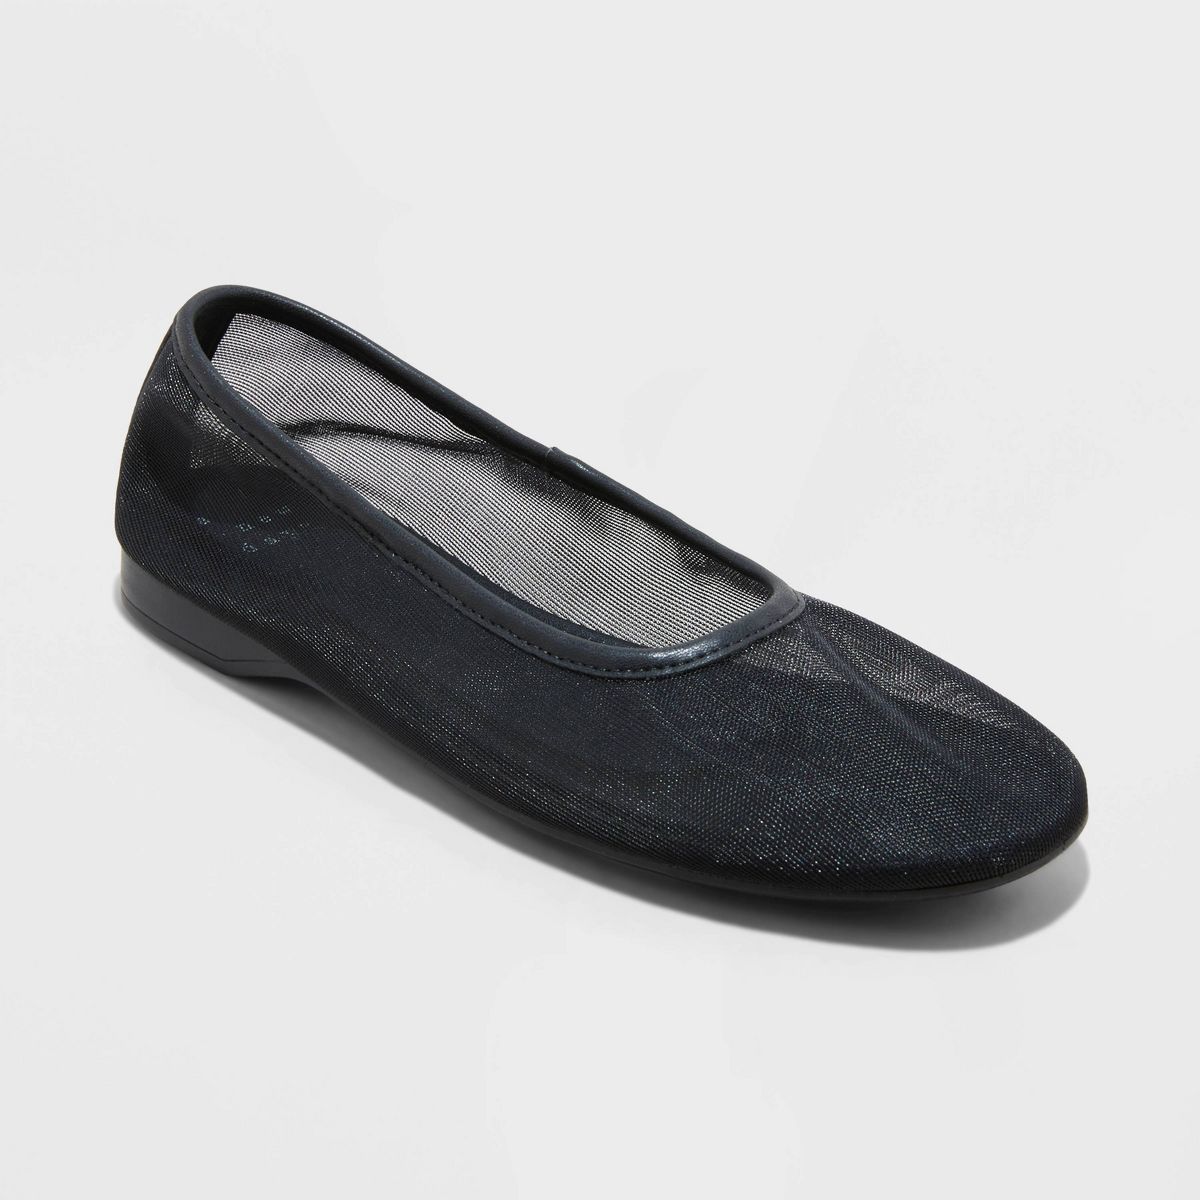 Women's Mel Mesh Ballet Flats with Memory Foam Insole - A New Day™ Black 7 | Target